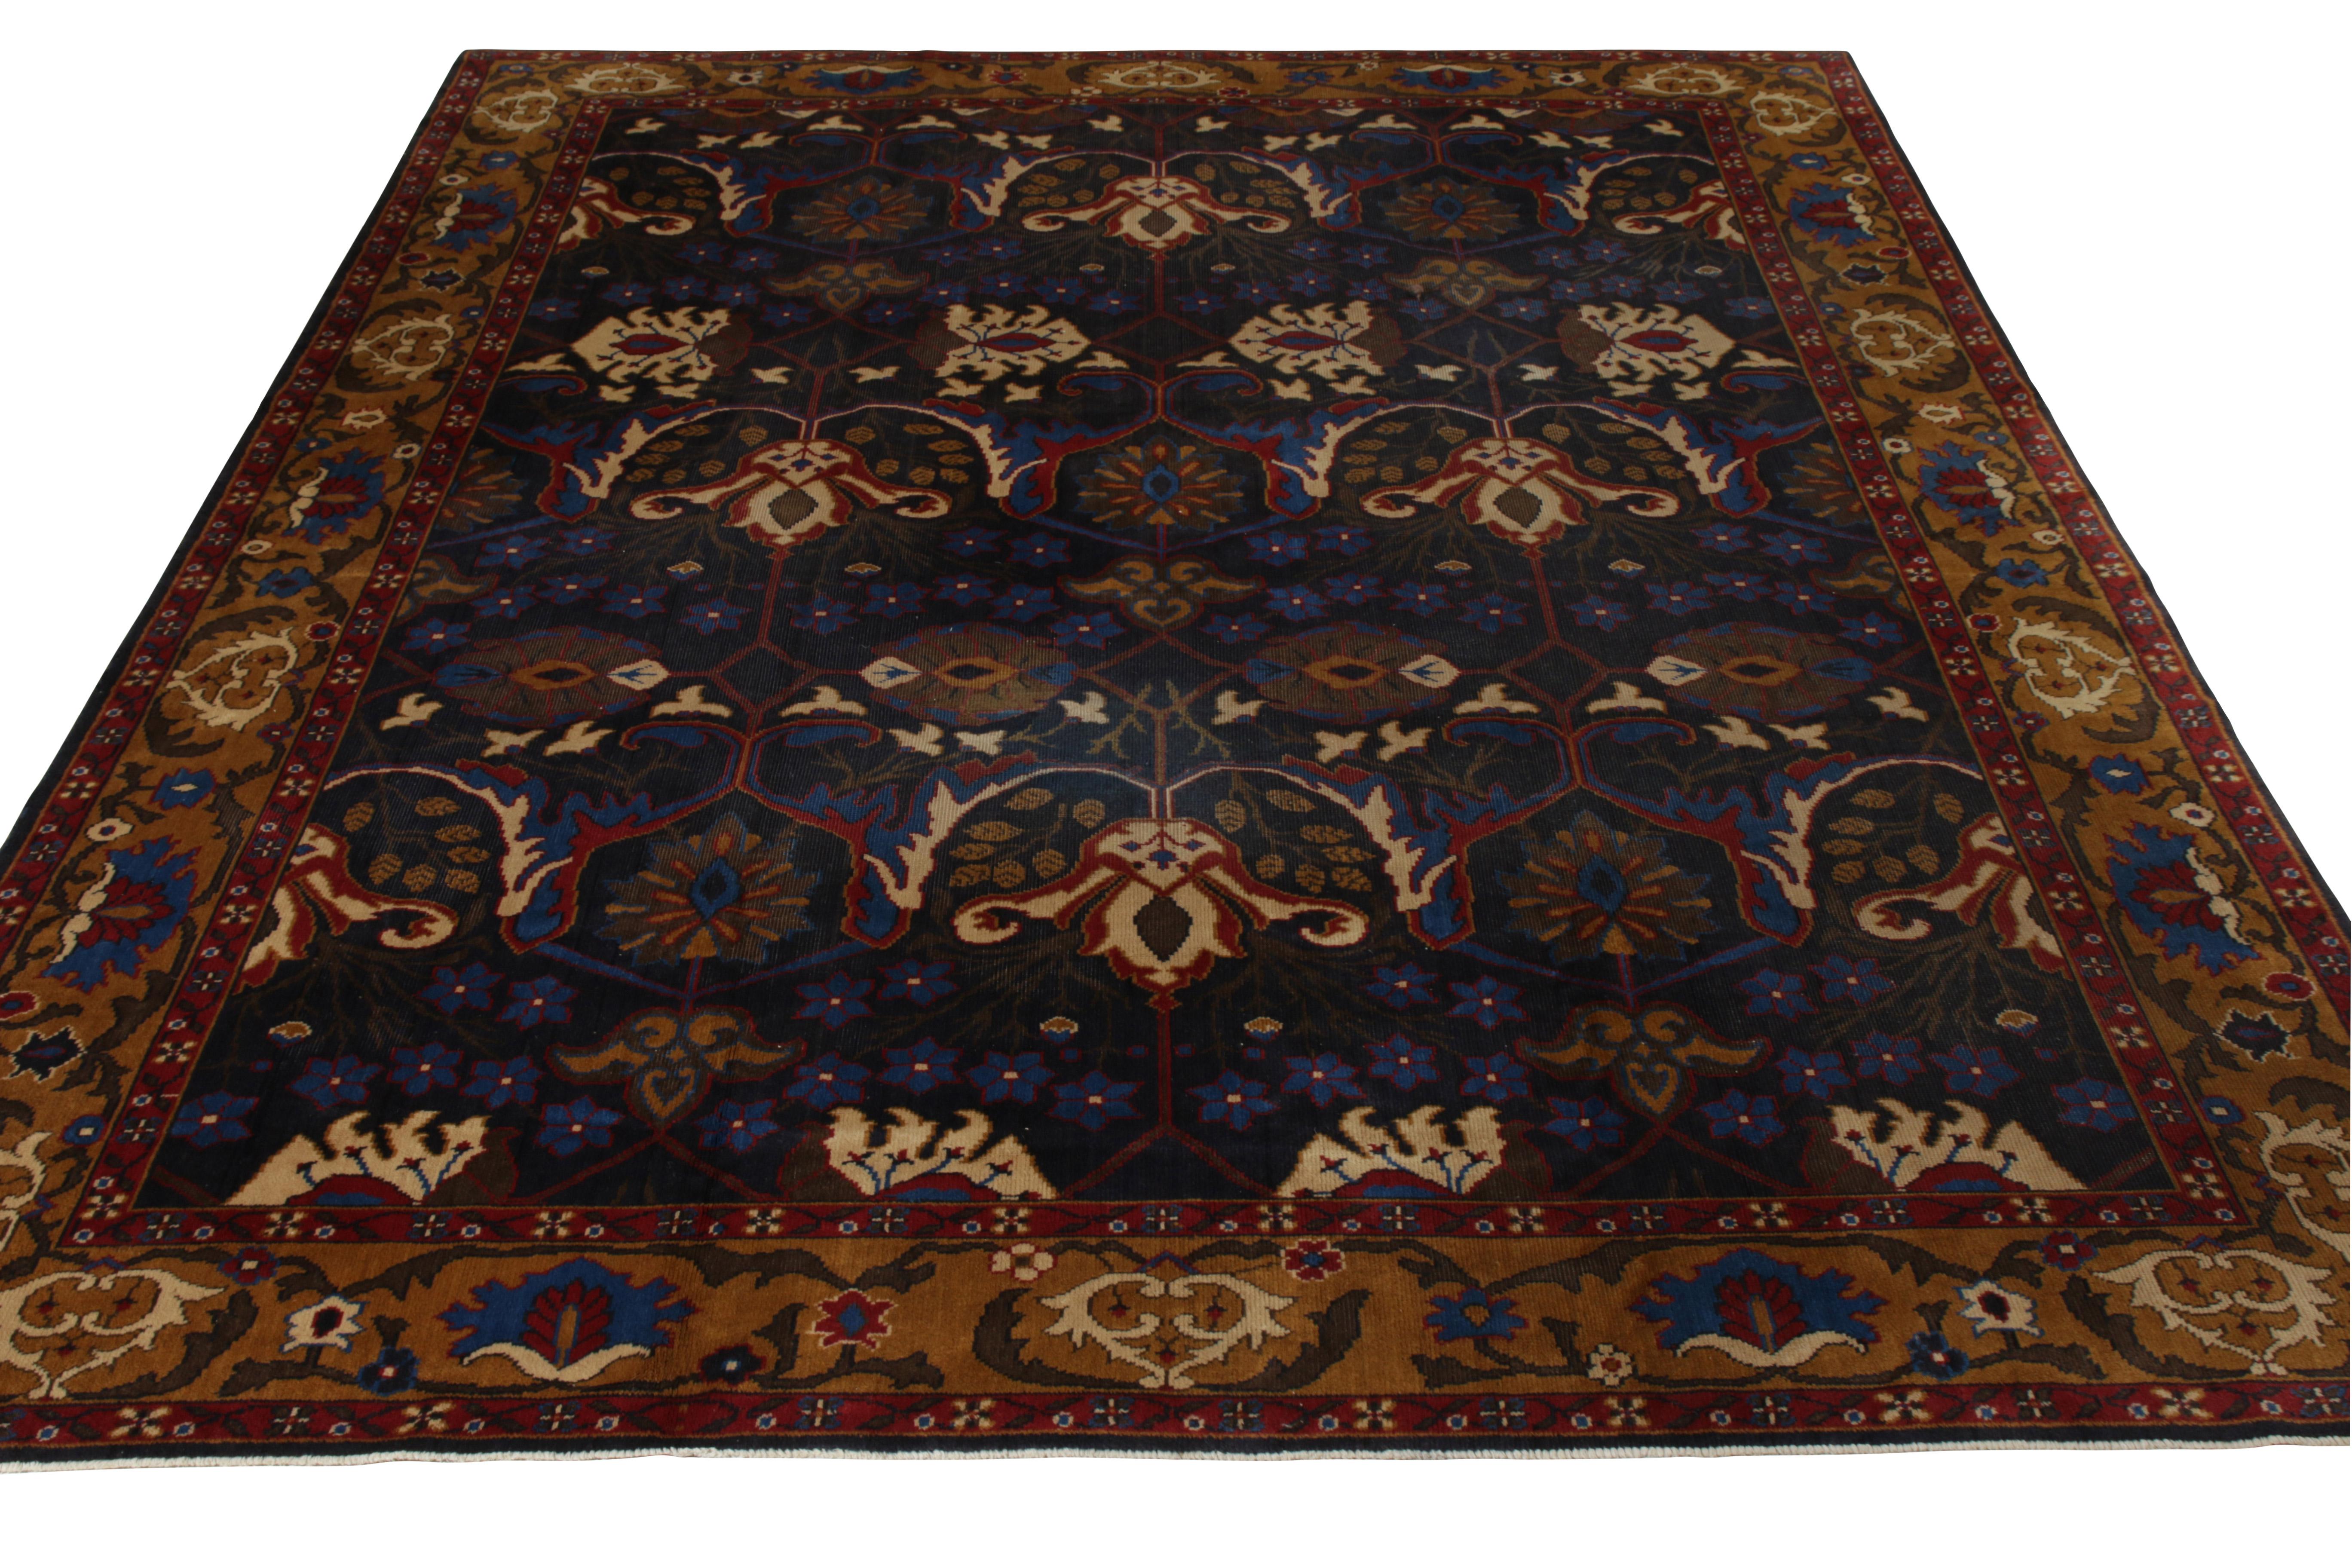 An antique 10 x 13 Agra rug of regal gold and blue, hand knotted in wool originating from India circa 1910-1920. 

On the design: The interesting stylistic sensibility in the floral patterns may connote inspiration from celebrated Bidjar rugs of